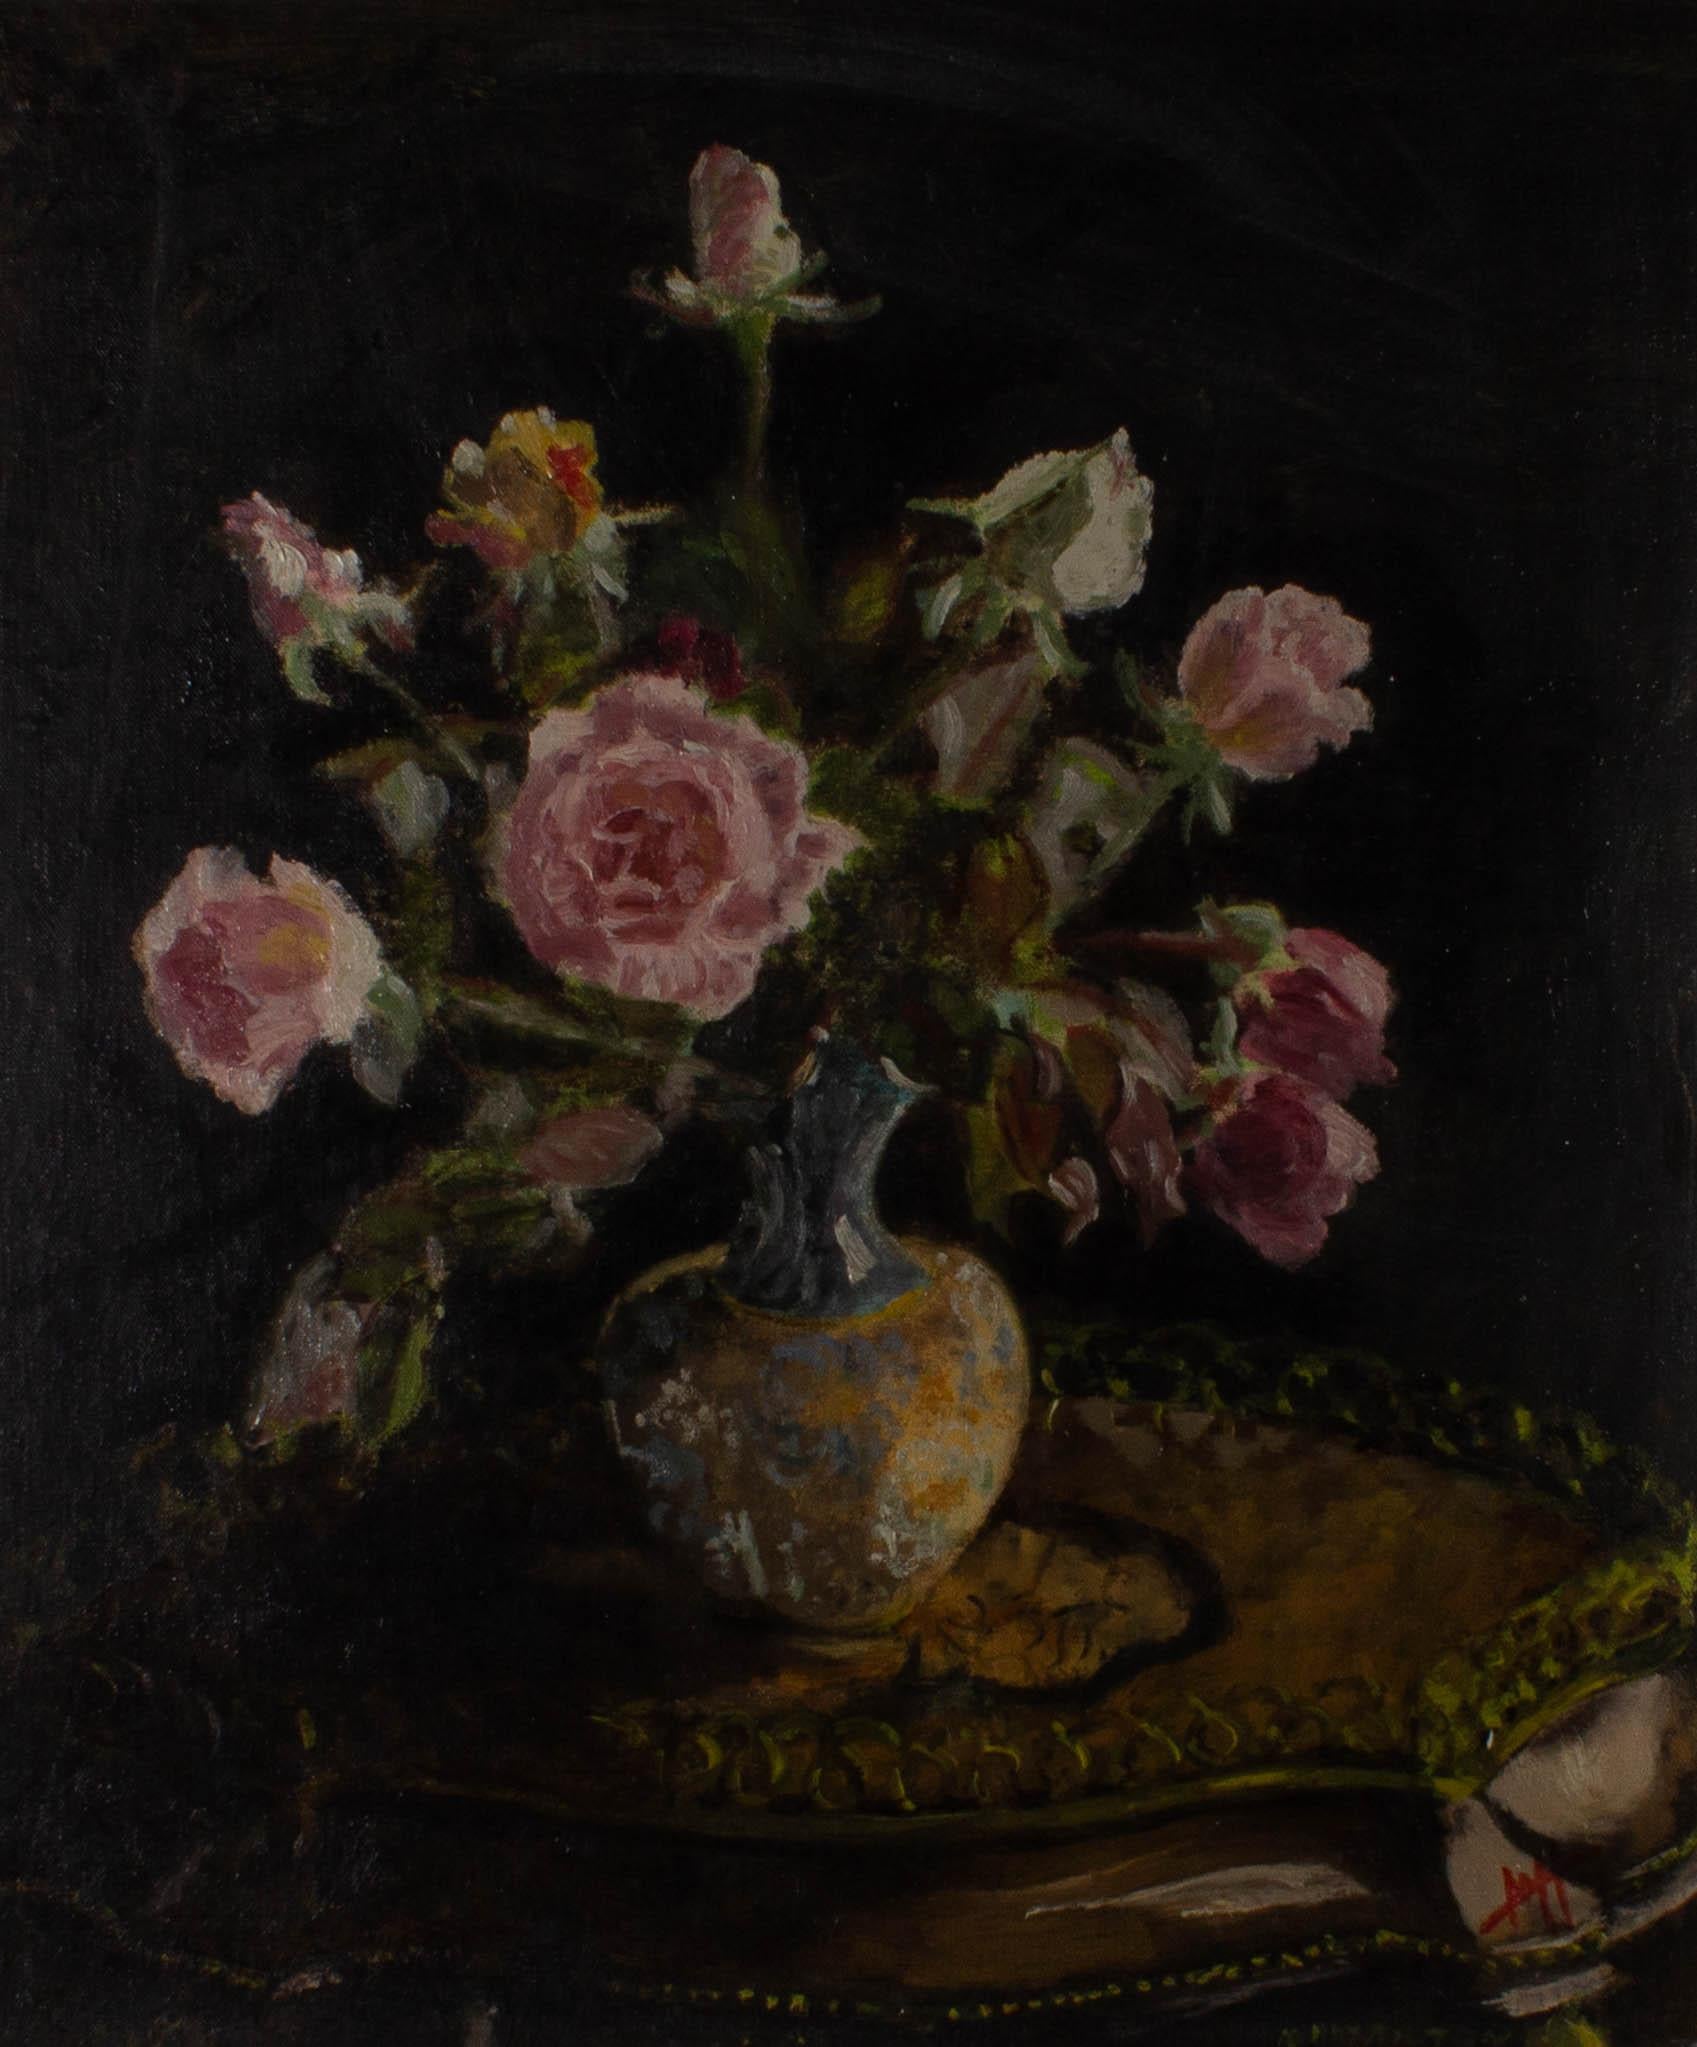 A rich, atmospheric study of pink roses in a decorative vase. The flowers are placed on an ornate side table against a deep blue background. Using expressive brush strokes, the artist has added a sense of texture and movement to this still life